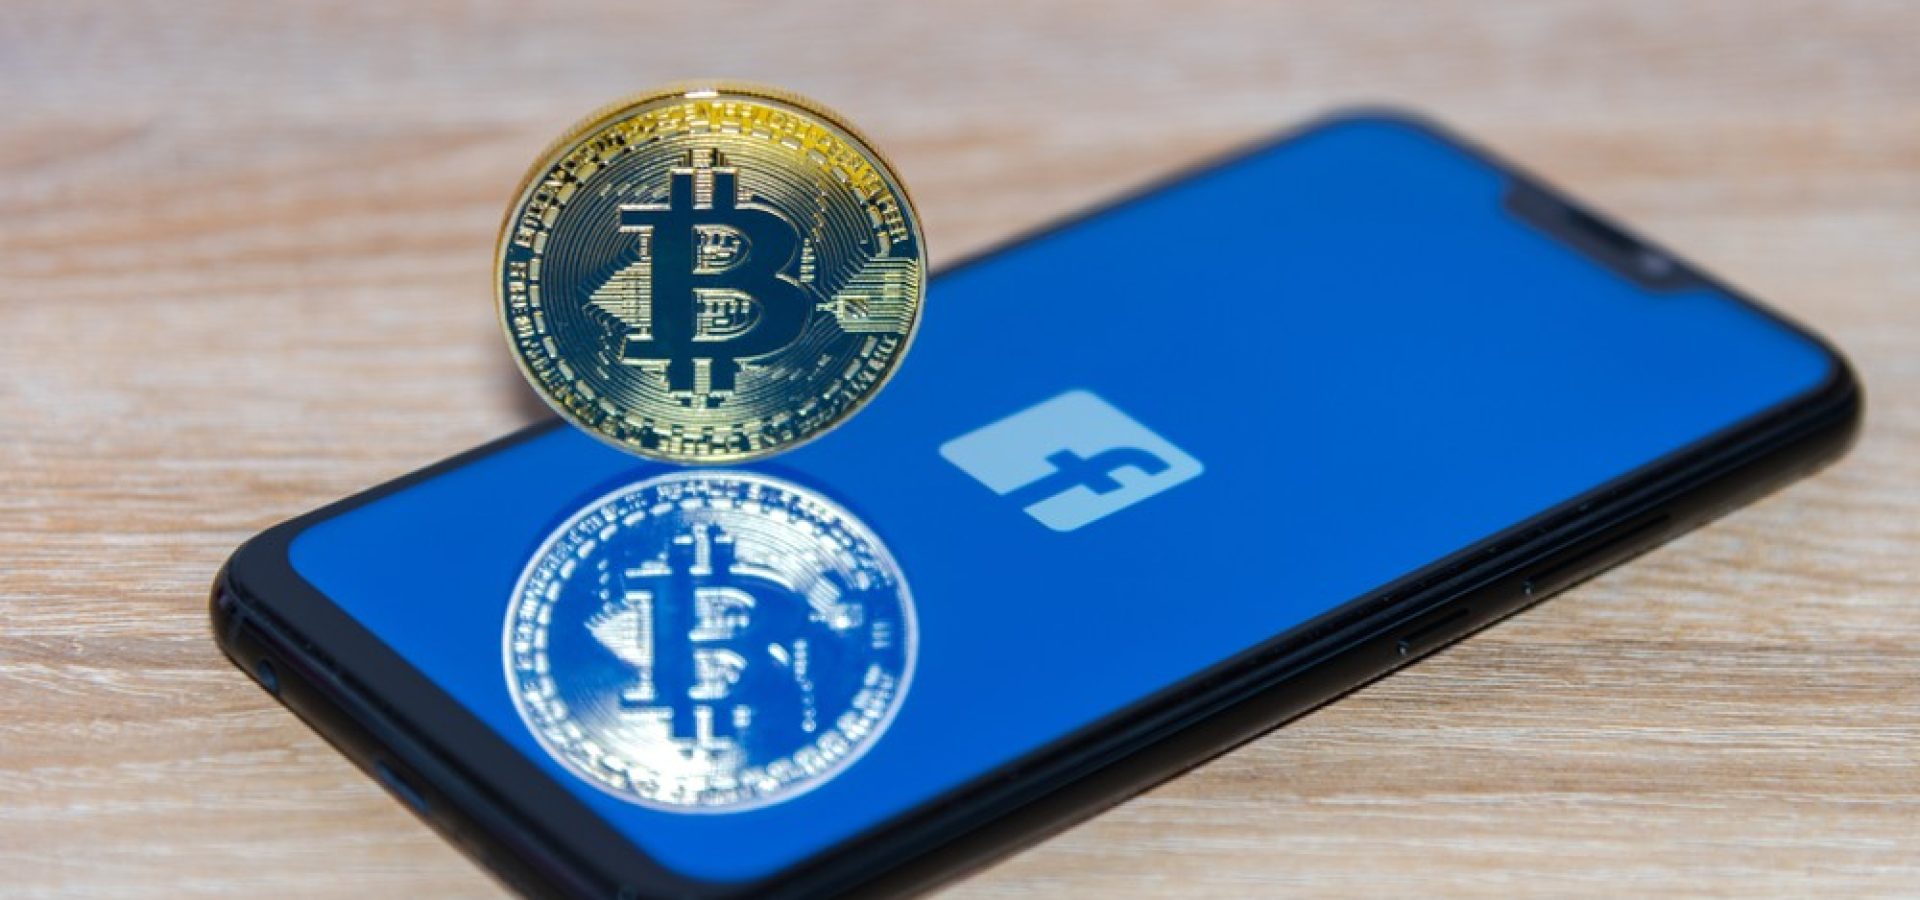 facebook logo with a bitcoin net to it on the phone